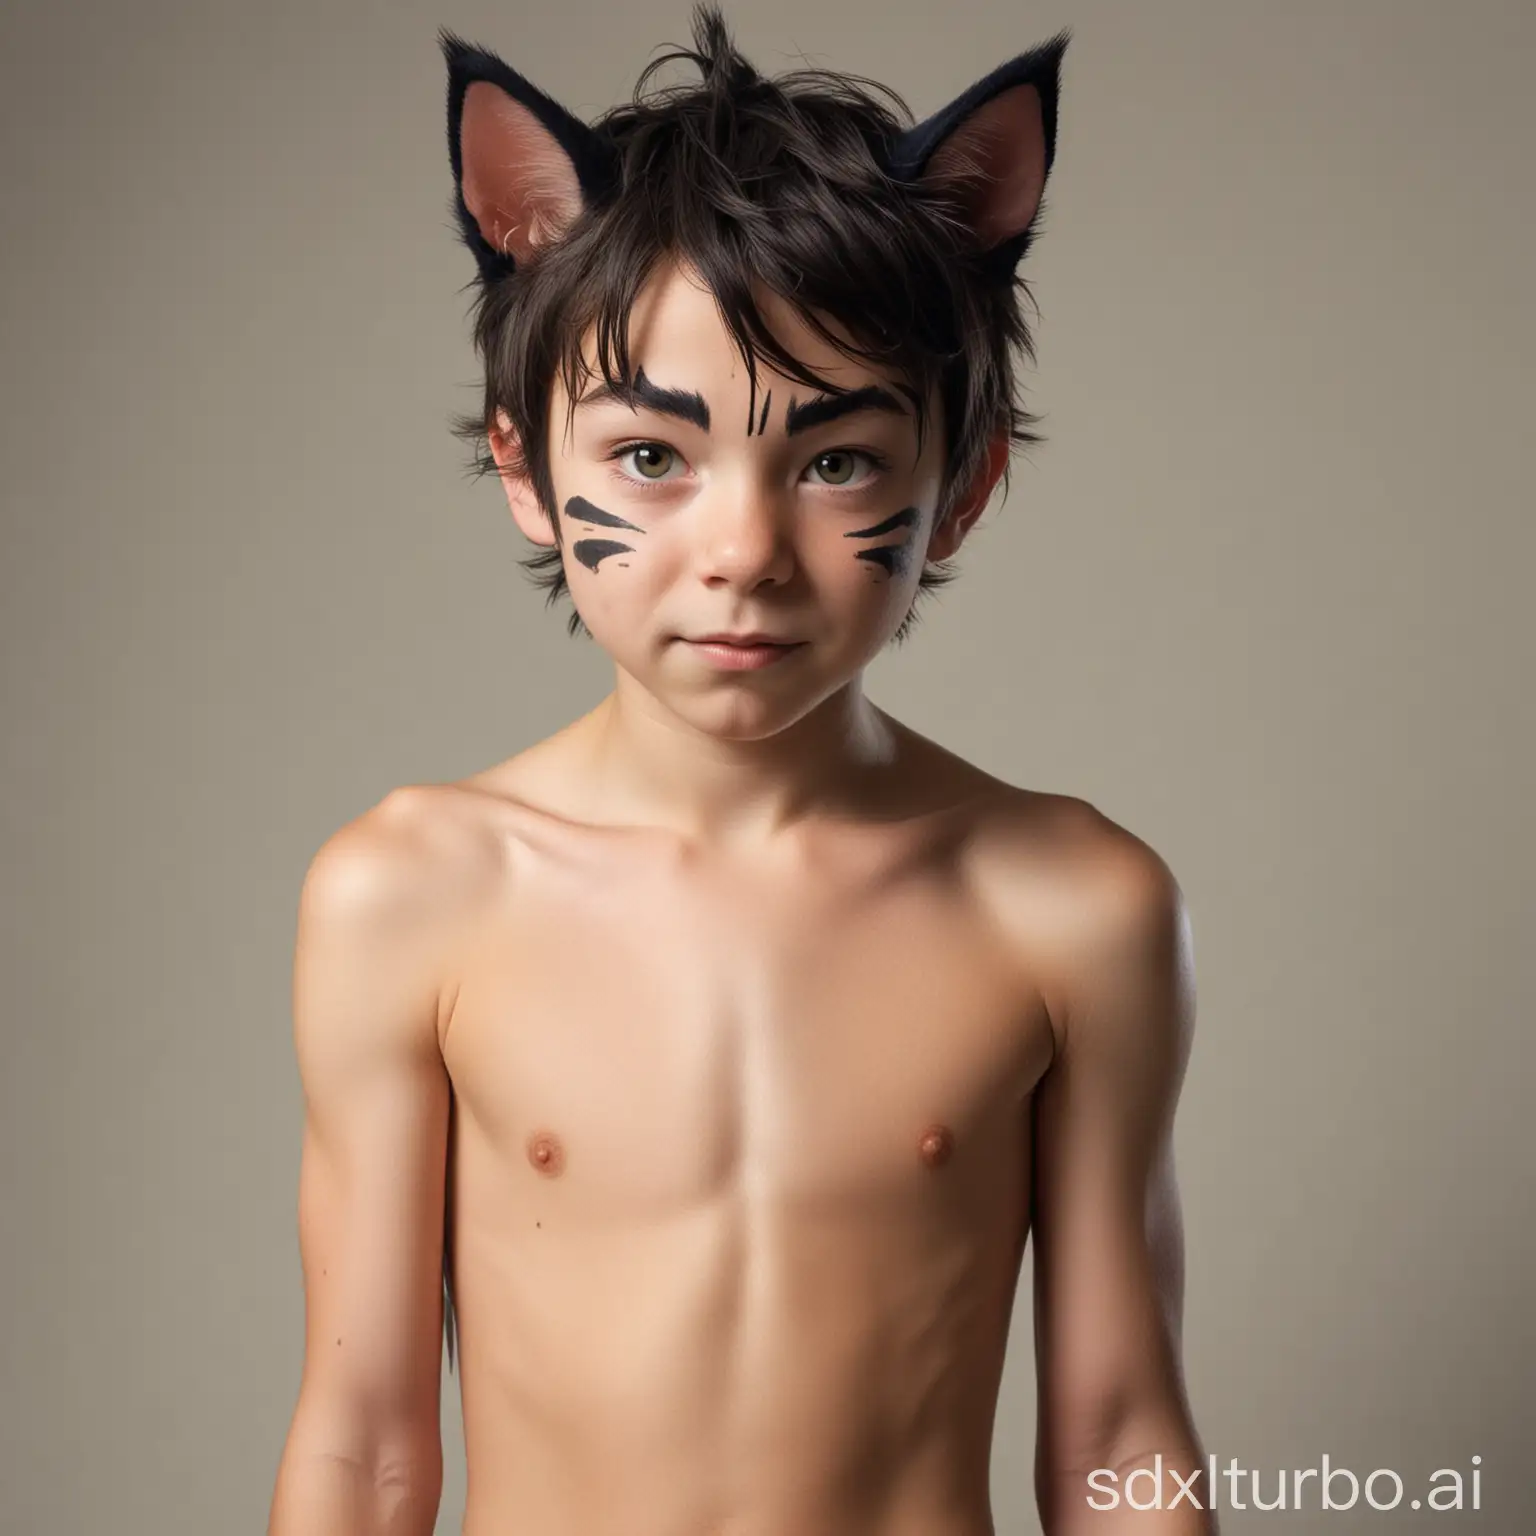 Adorable-Catboy-Posing-Playfully-with-Enigmatic-Charm